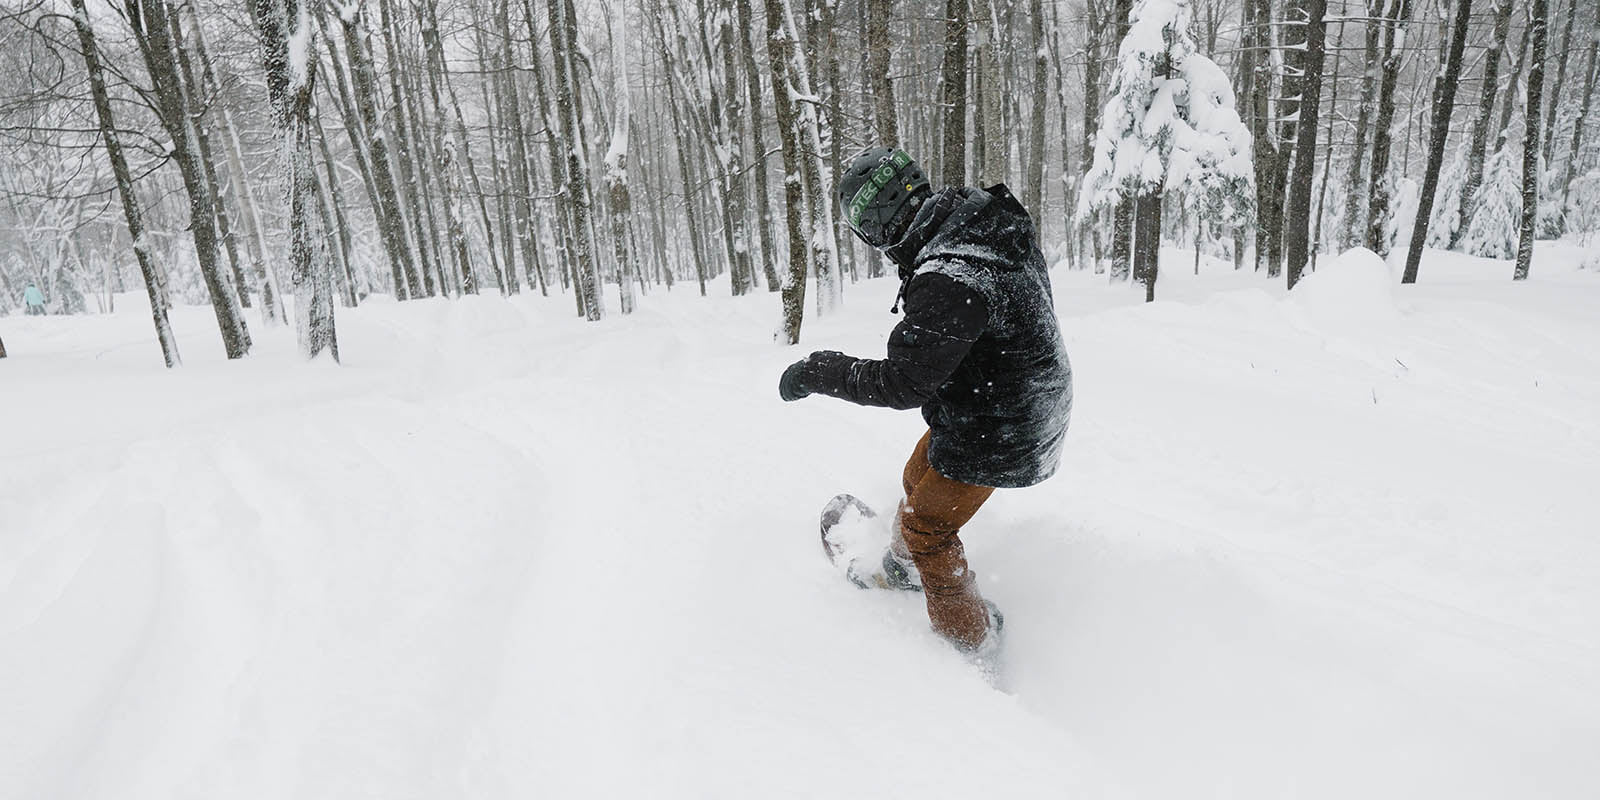 Up to 30 inches (75cm) of snow storm totals for NE USA, Bromley Mountain